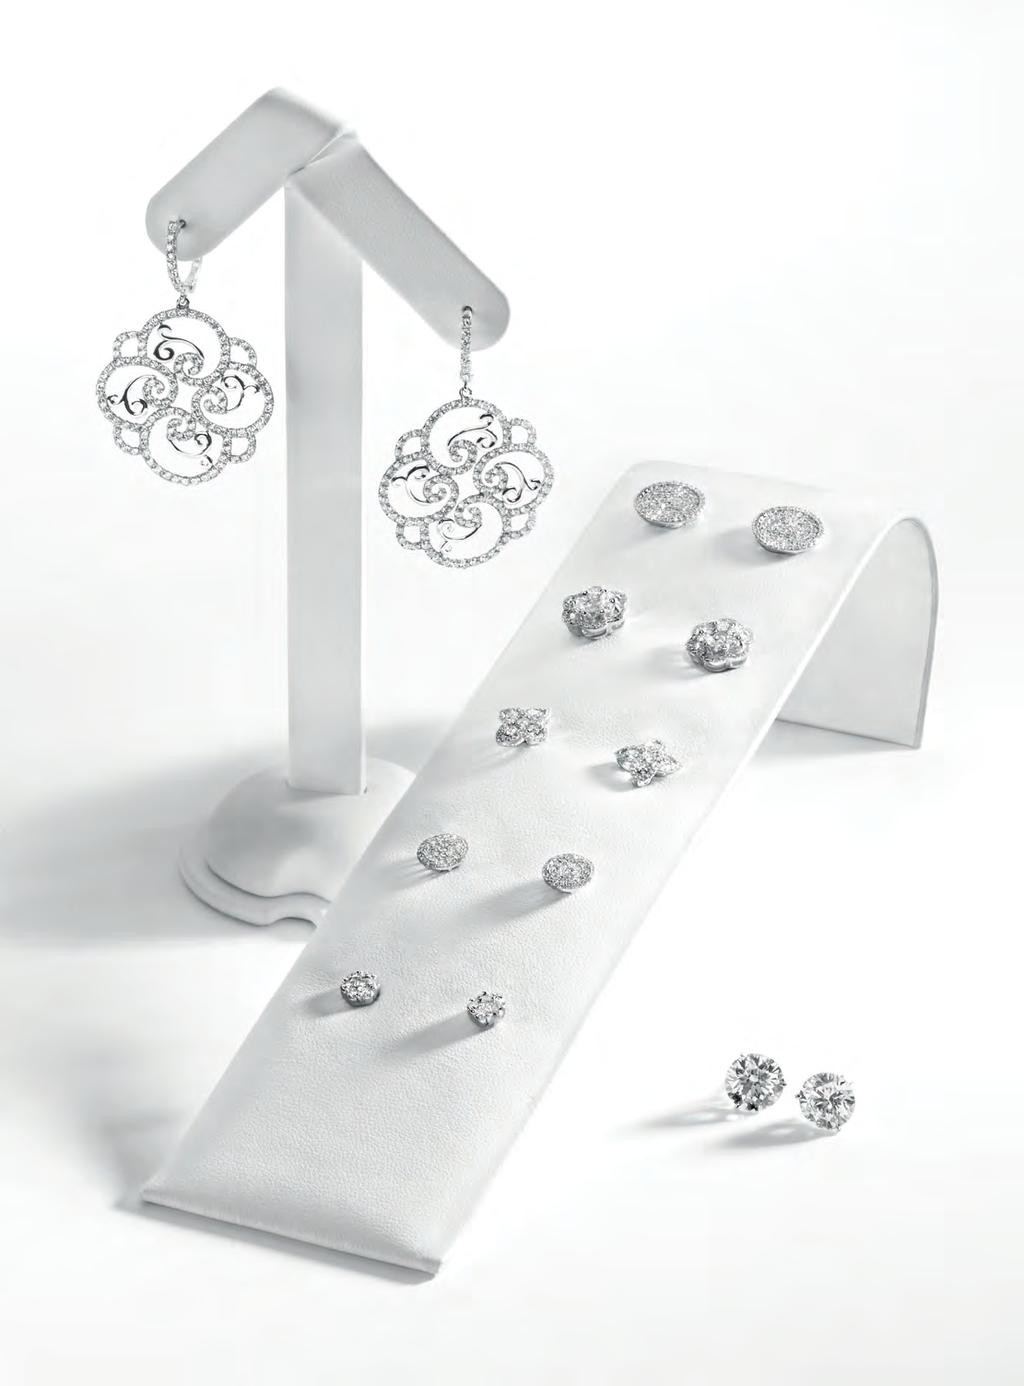 $12,900 $6,775 $2,250 $3,000 $23,900 $5,700 $2,350 $1,275 Diamond Studs Available in all sizes and prices.